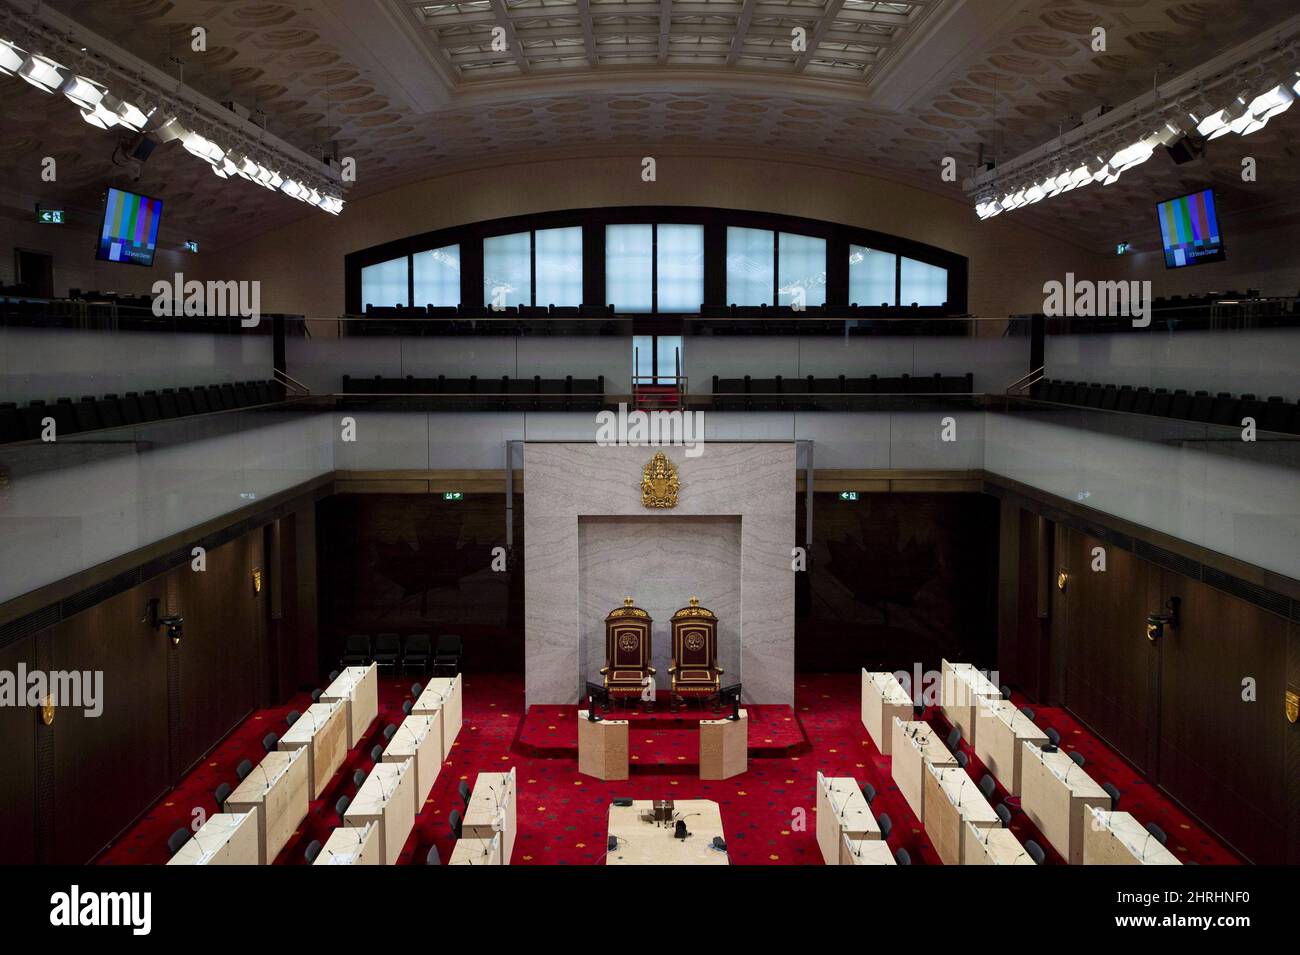 The new temporary Senate Chamber at the Senate of Canada Building, formerly the Government Conference Centre, is shown in Ottawa on December 13, 2018. The long-delayed introduction of cameras to broadcast meetings of the Senate is proceeding after a shaky start. The House of Commons has been televised for more than 40 years but the Senate is only beginning to broadcast meetings in its main chamber with a move into a temporary home while Centre Block is being renovated. A special engineer was brought in to deal with the wobbly cameras, which were attributed to 'natural vibrations and inherent m Stock Photo